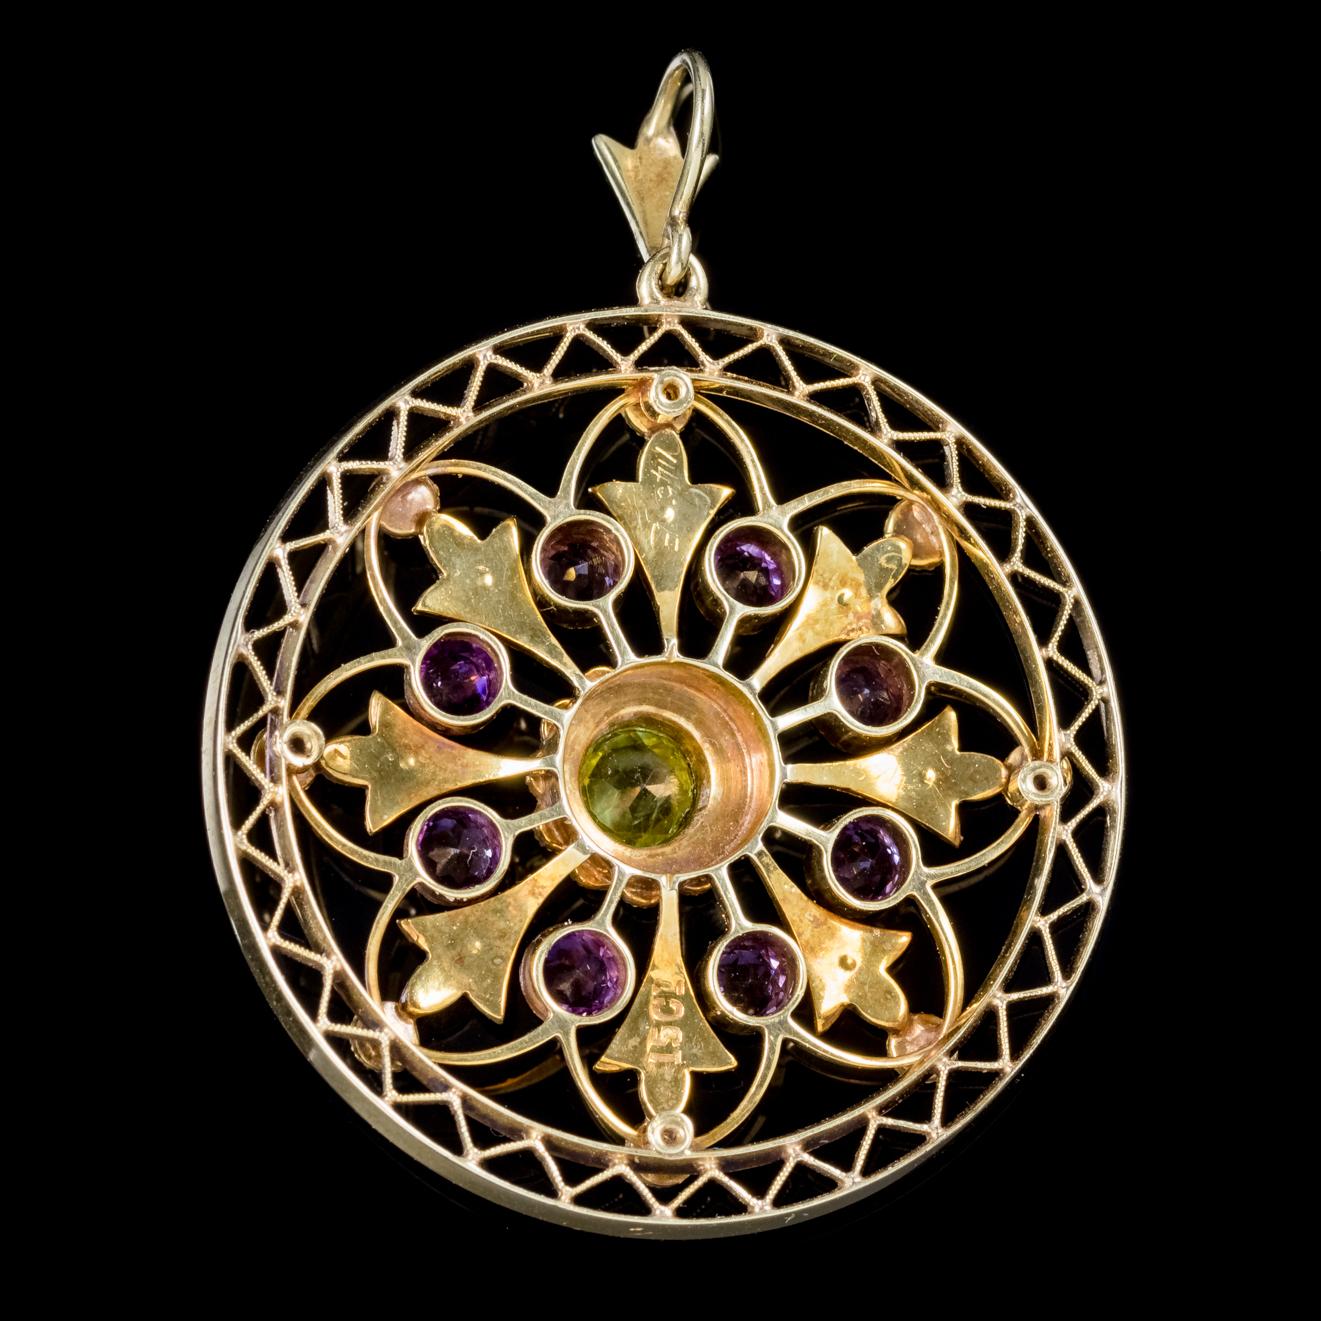 A stunning antique Victorian Suffragette pendant C. 1900, adorned with creamy white Pearls, eight violet Amethysts and a 0.25ct green Peridot in the centre. 

Suffragettes liked to be depicted as feminine, their jewellery popularly consisted of